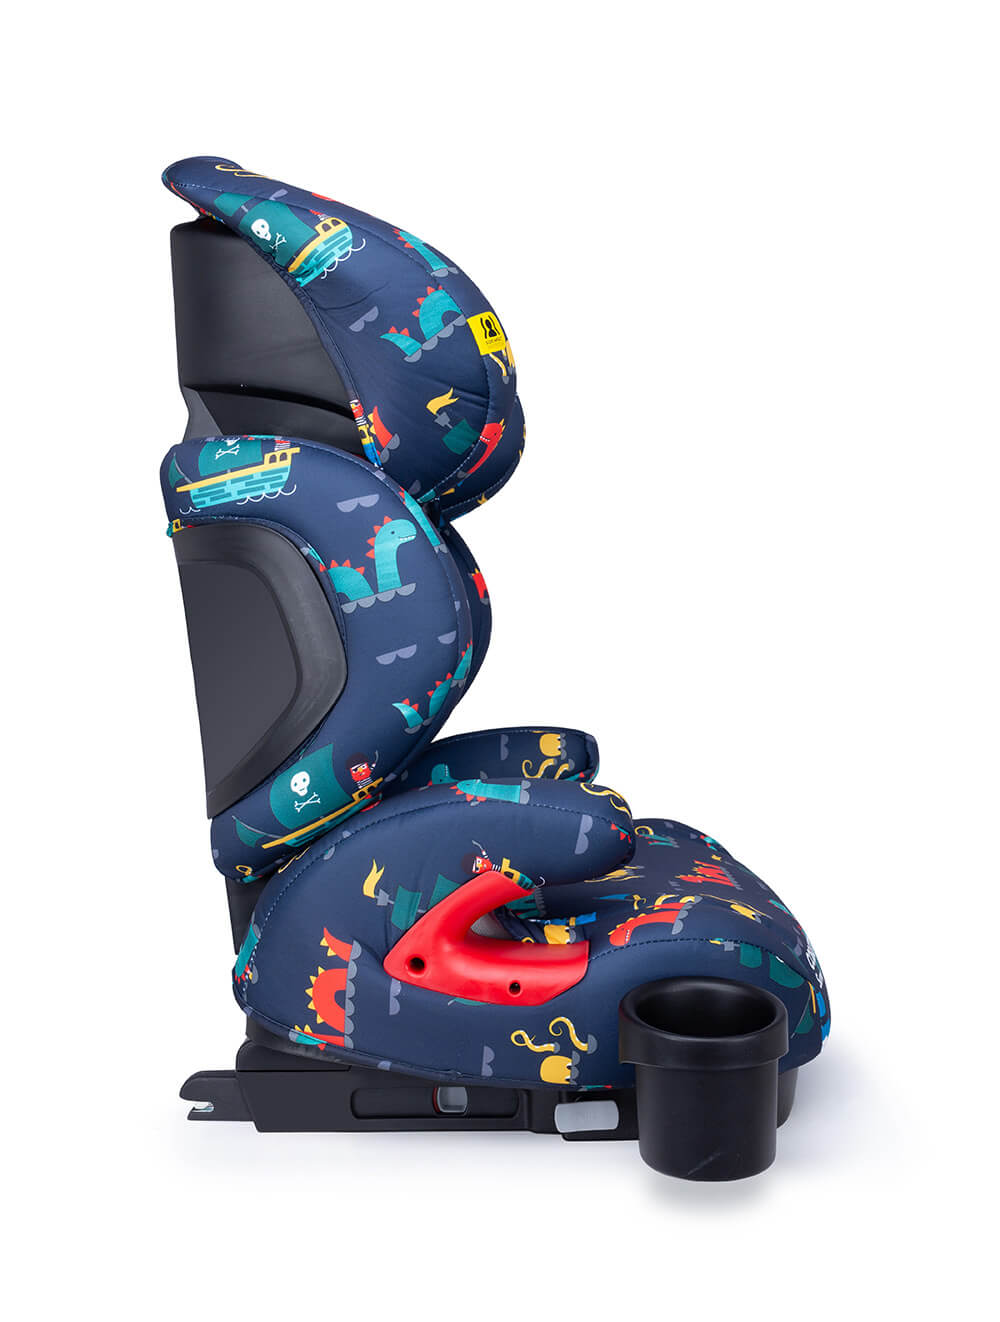 Sumo Group 2 3 Isofit Car Seat Sea Monsters